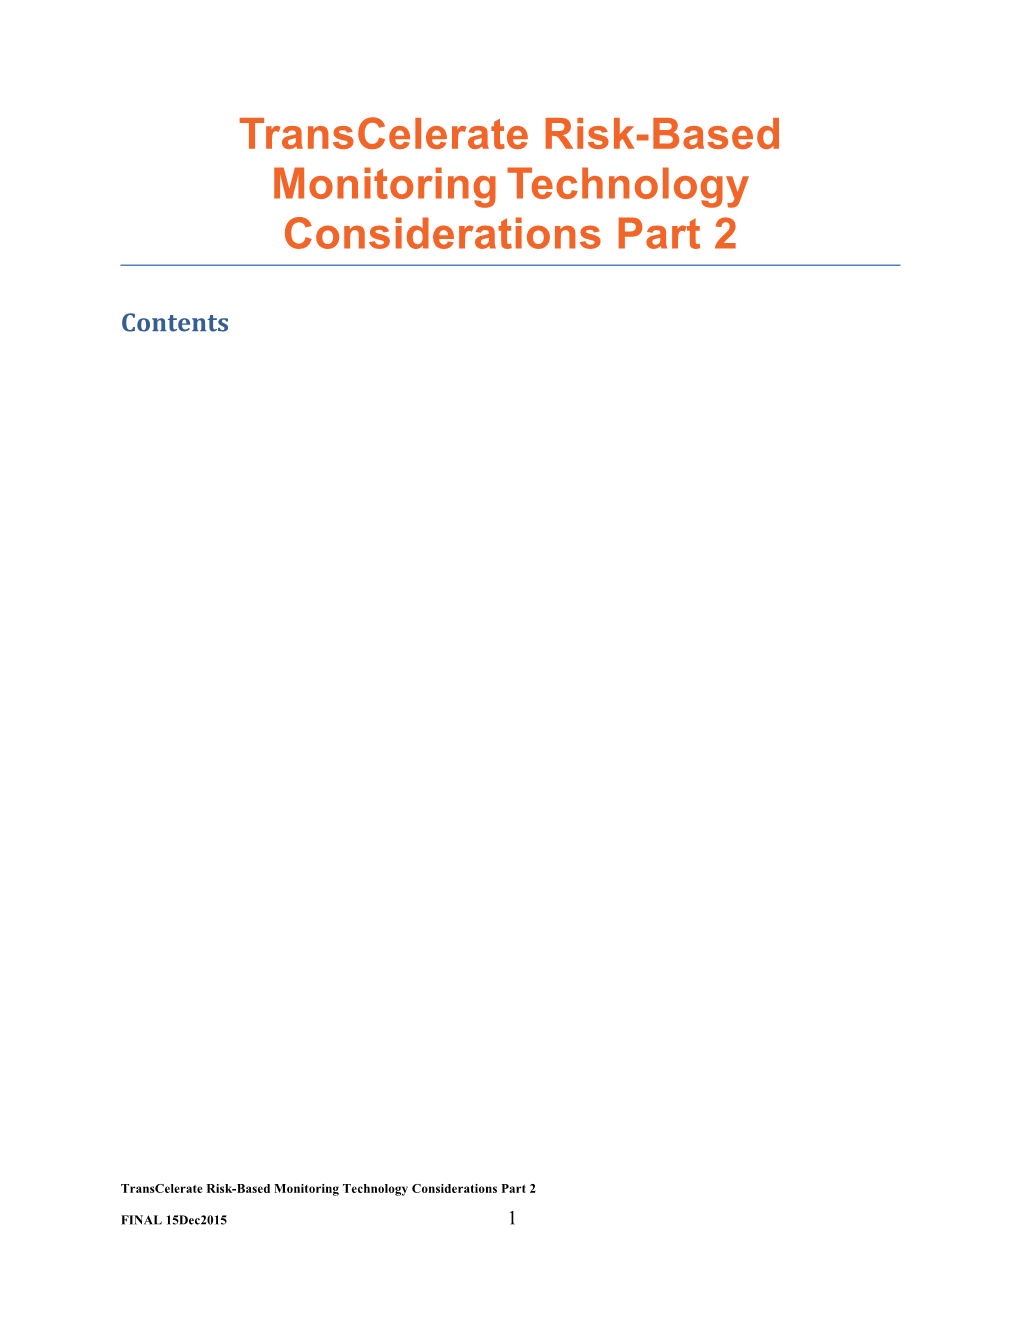 Central Monitoring Manuscript - Outline of Content